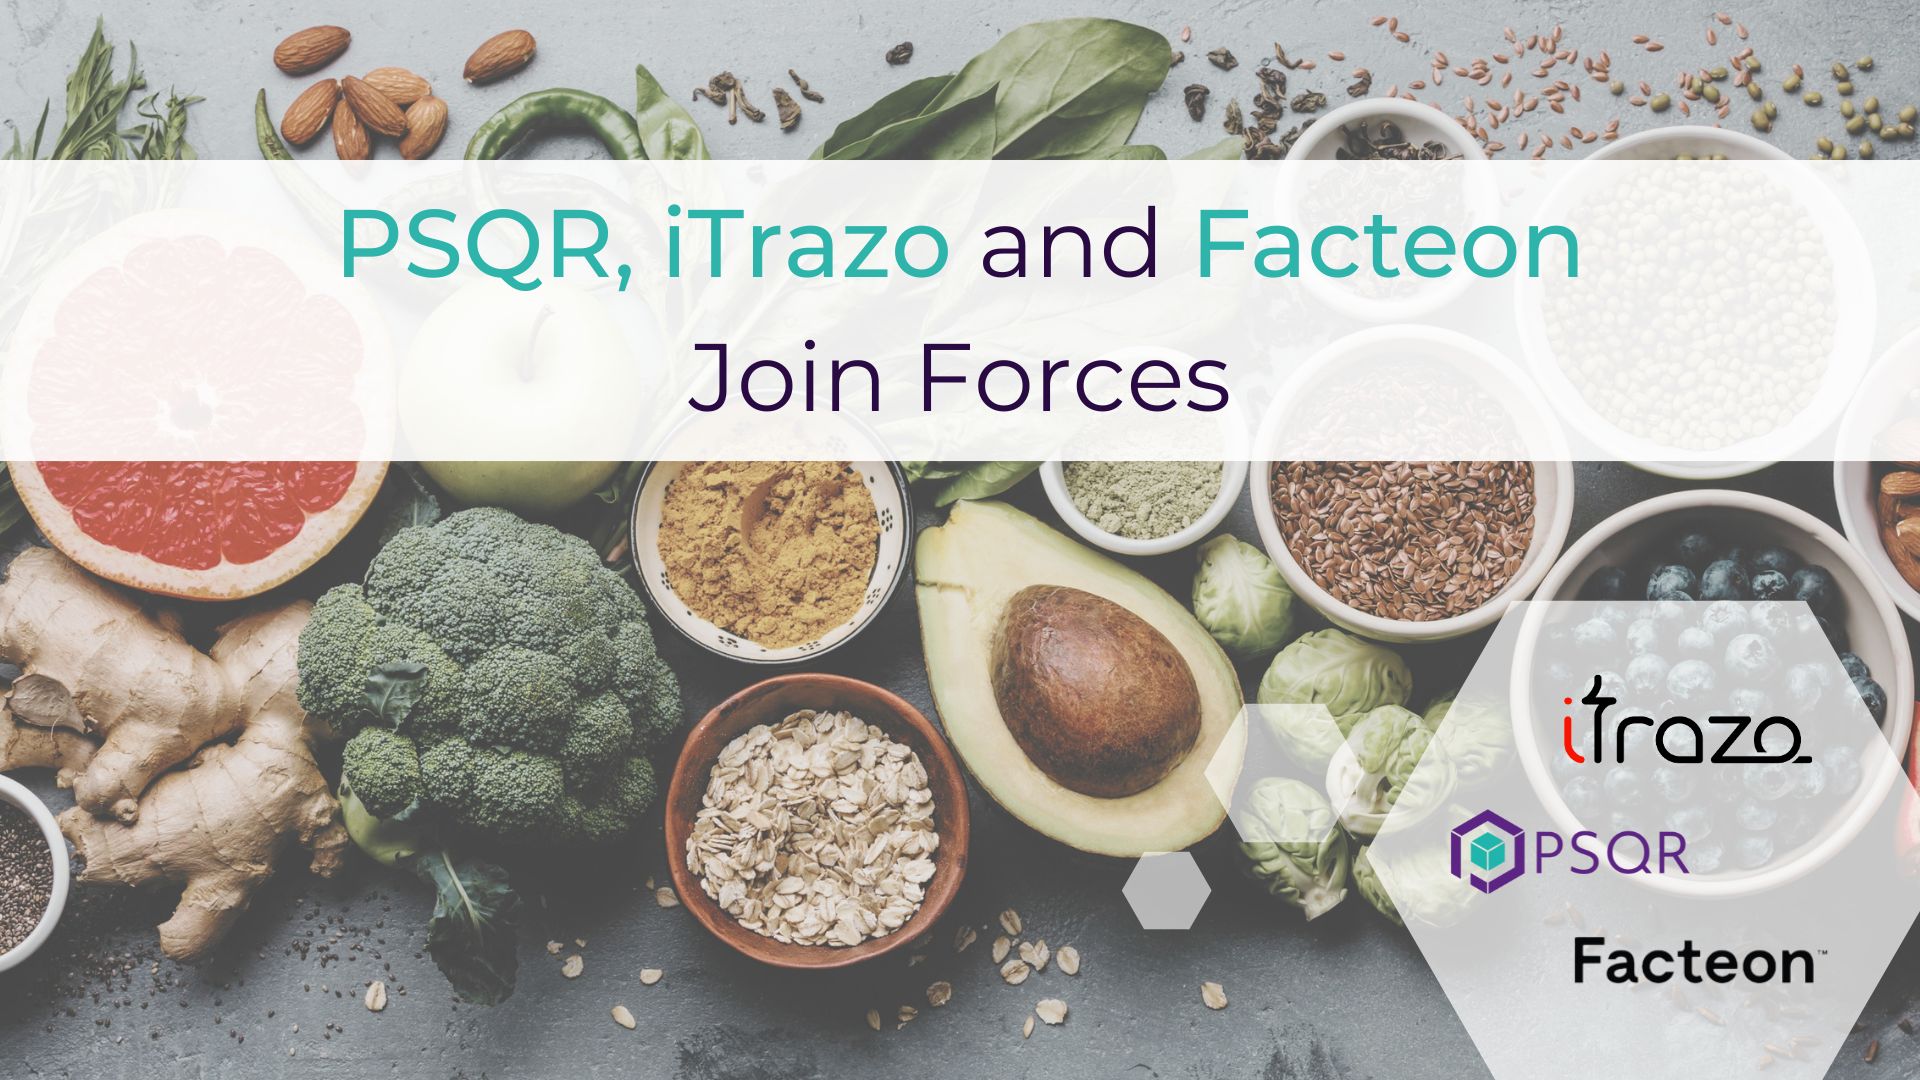 PSQR, iTrazo and Facteon become partners